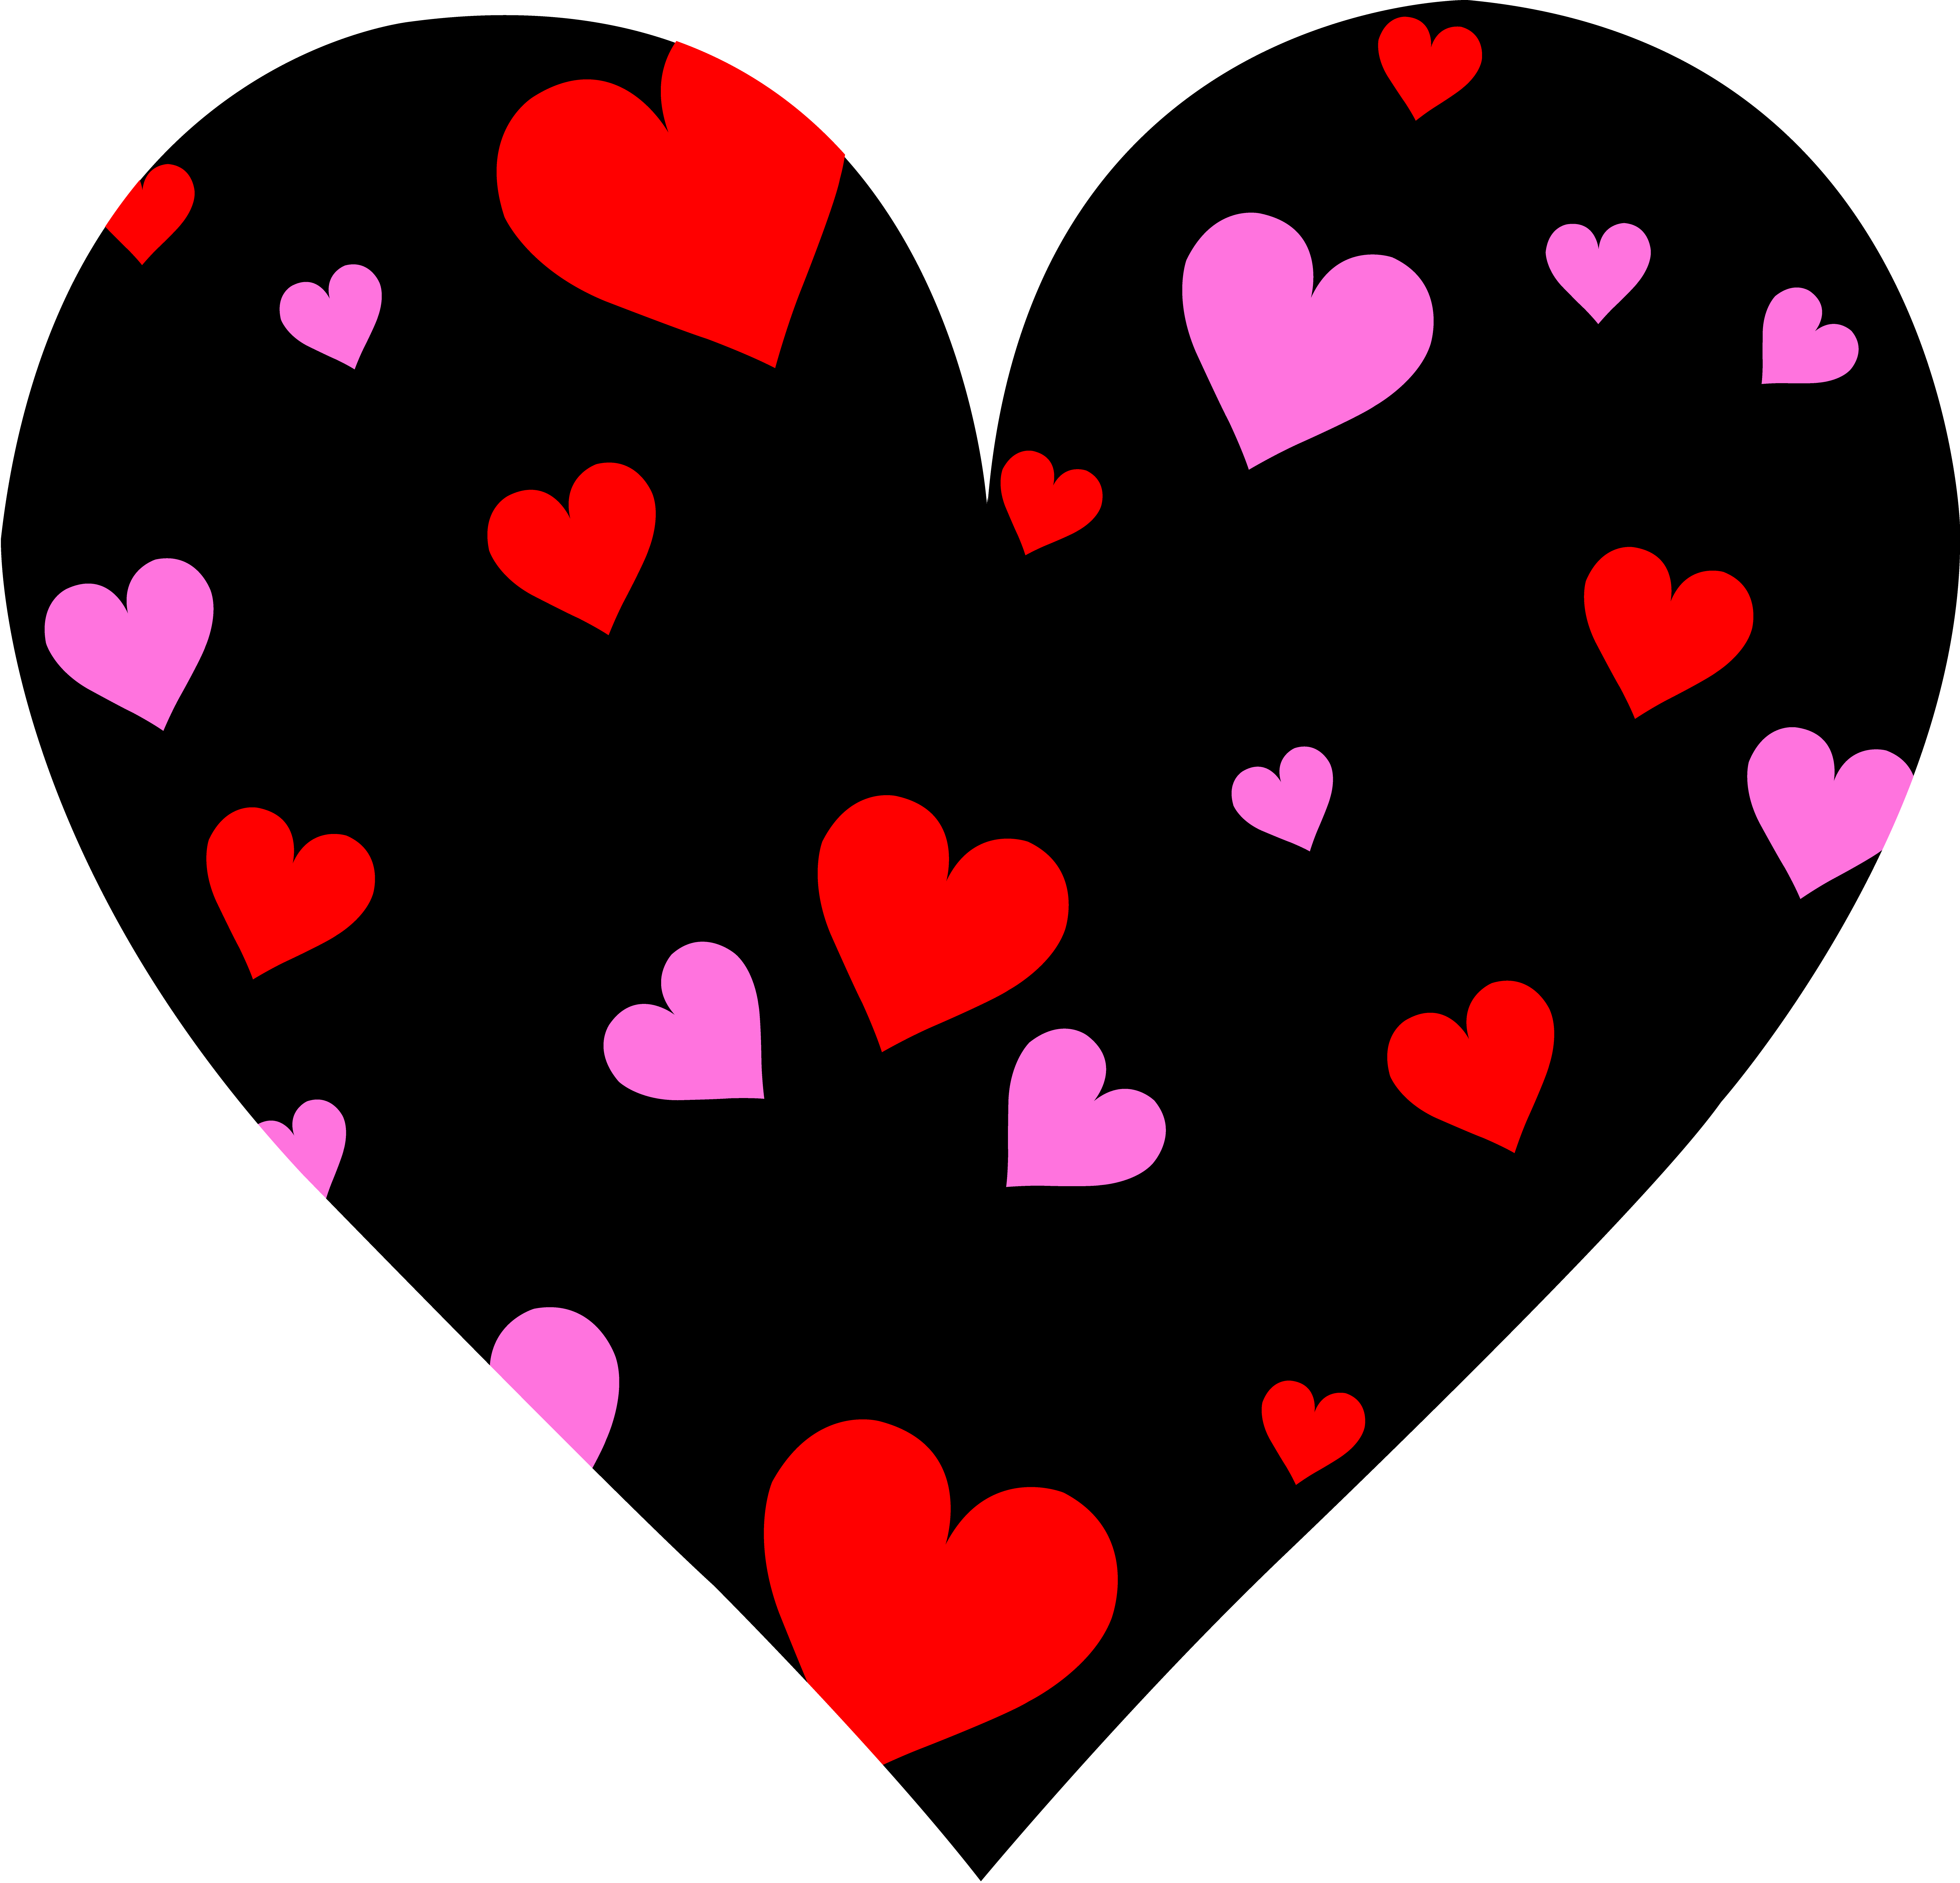 free-image-of-red-heart-download-free-image-of-red-heart-png-images